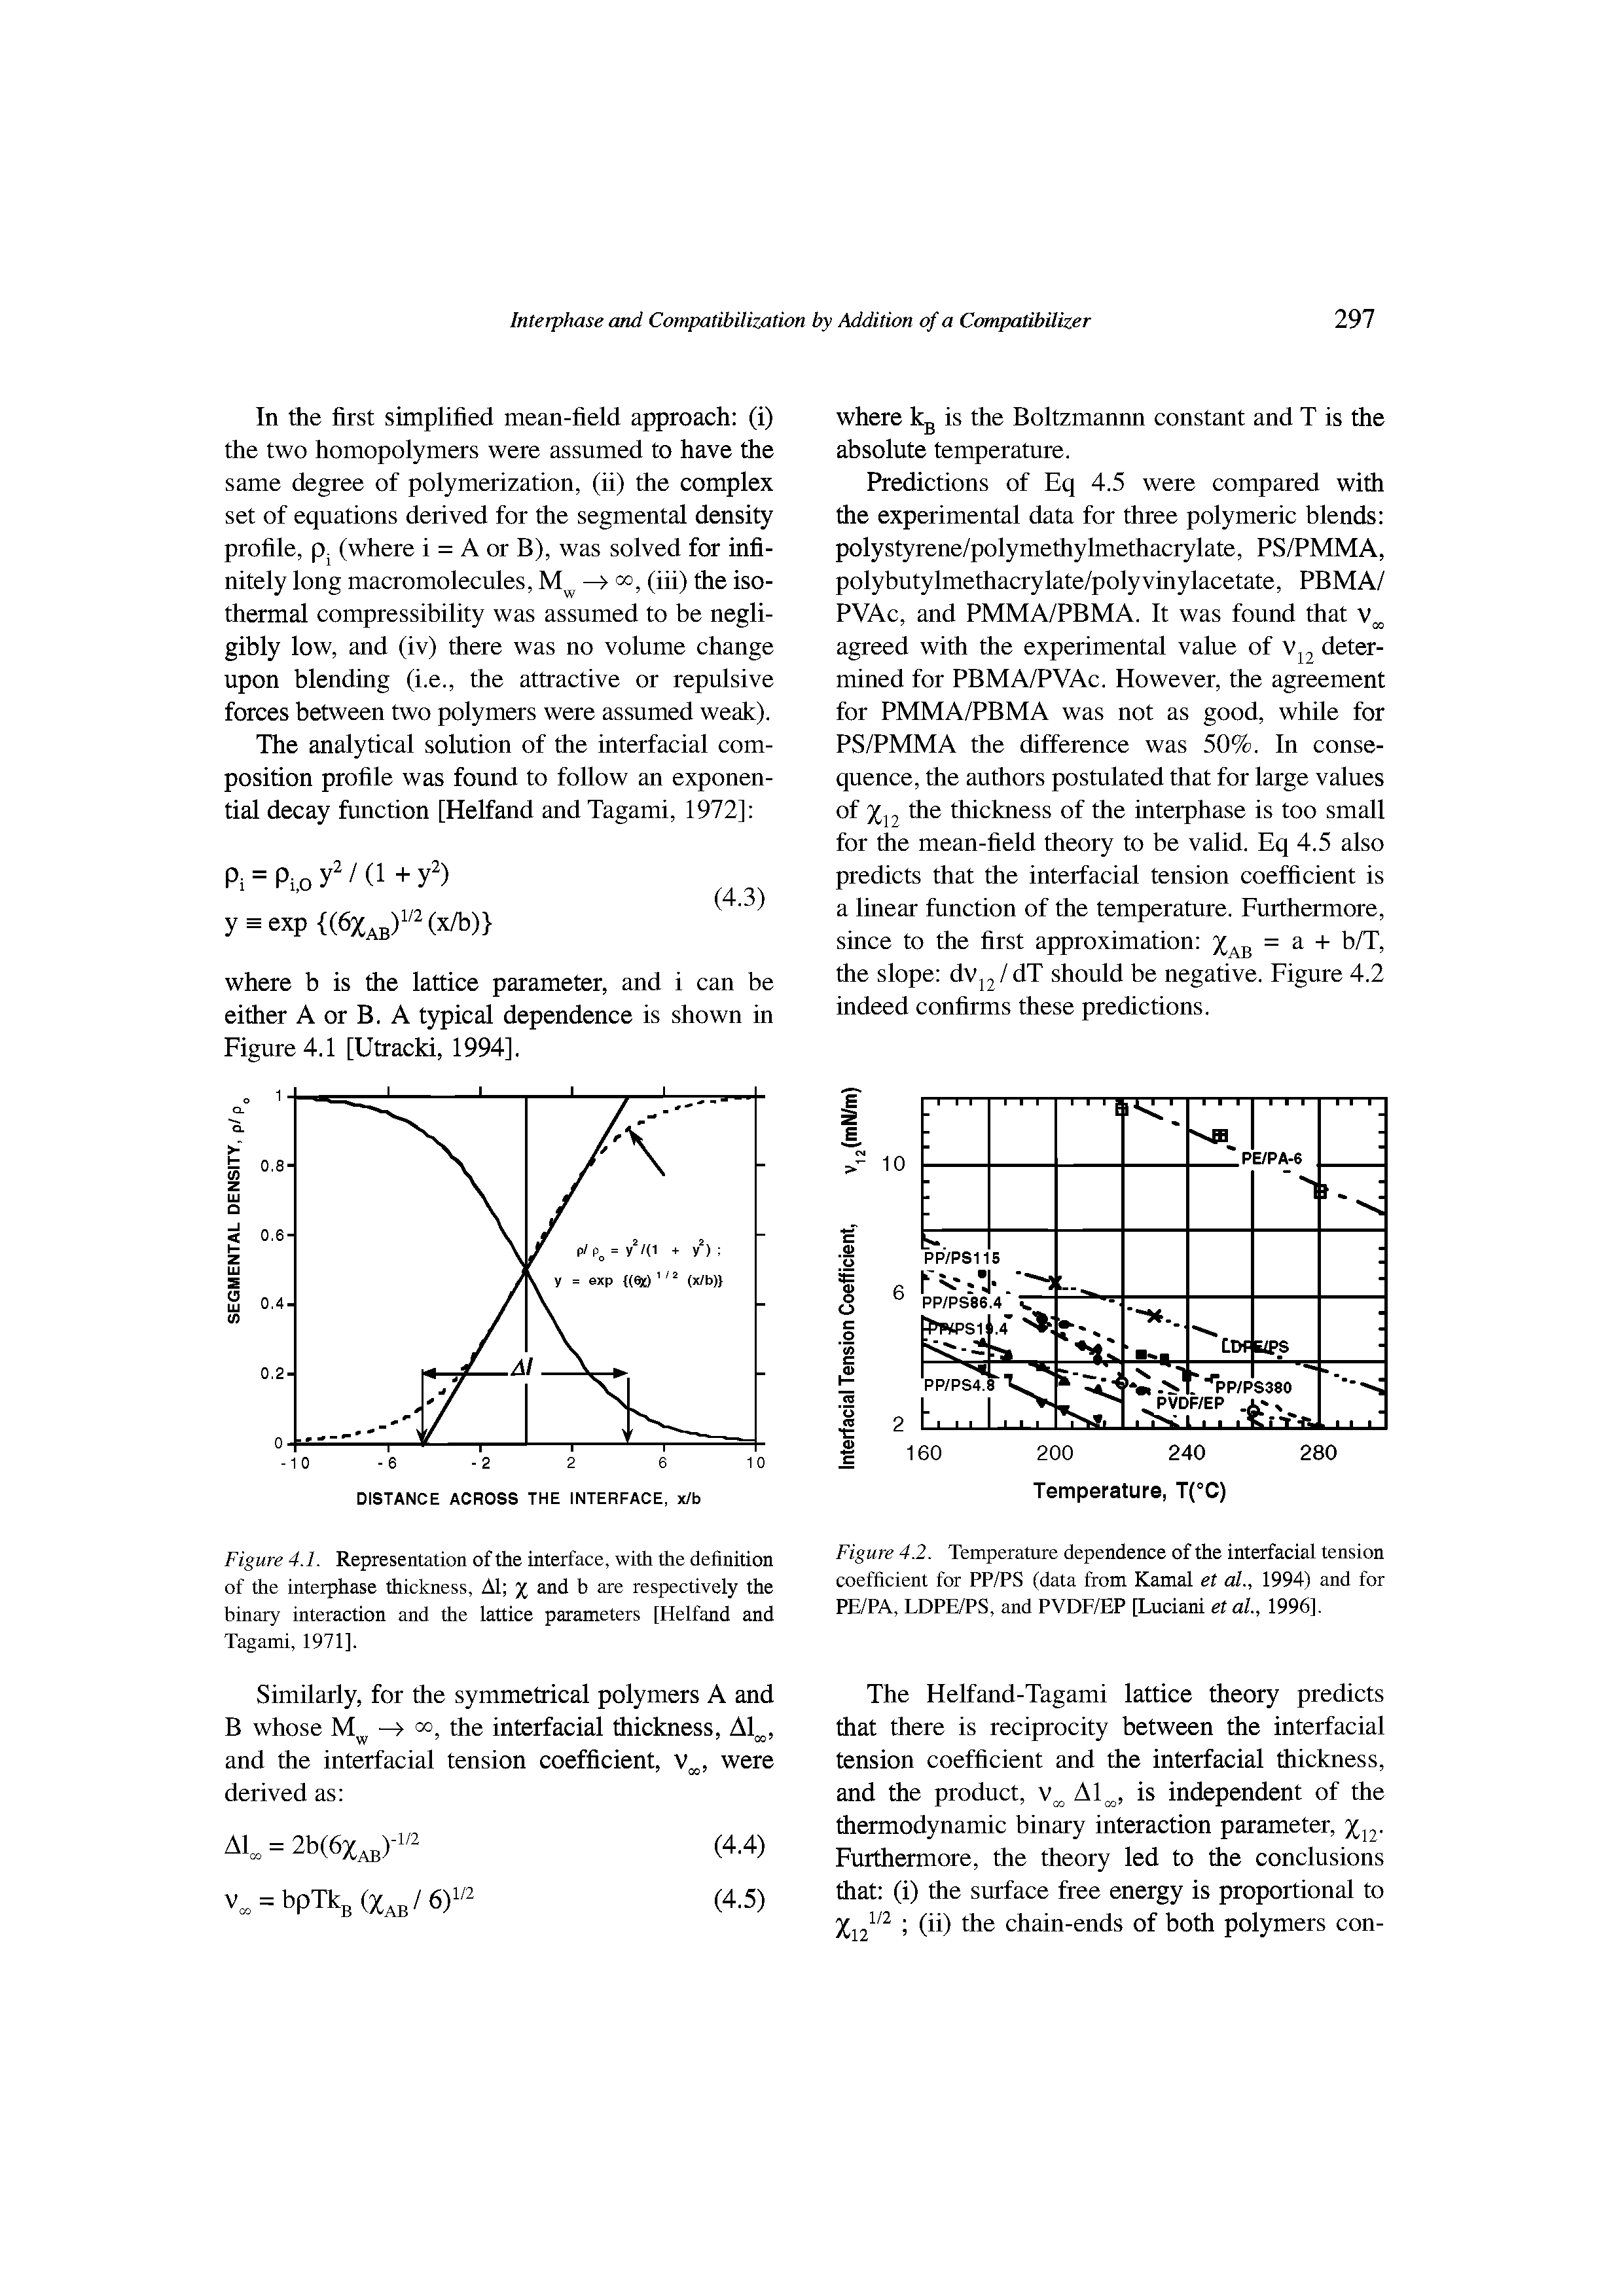 Figure 4.2. Temperature dependence of the interfacial tension coefficient for PP/PS (data from Kamal et al., 1994) and for PE/PA, LDPE/PS, and PVDE/EP [Luciani et al, 1996].